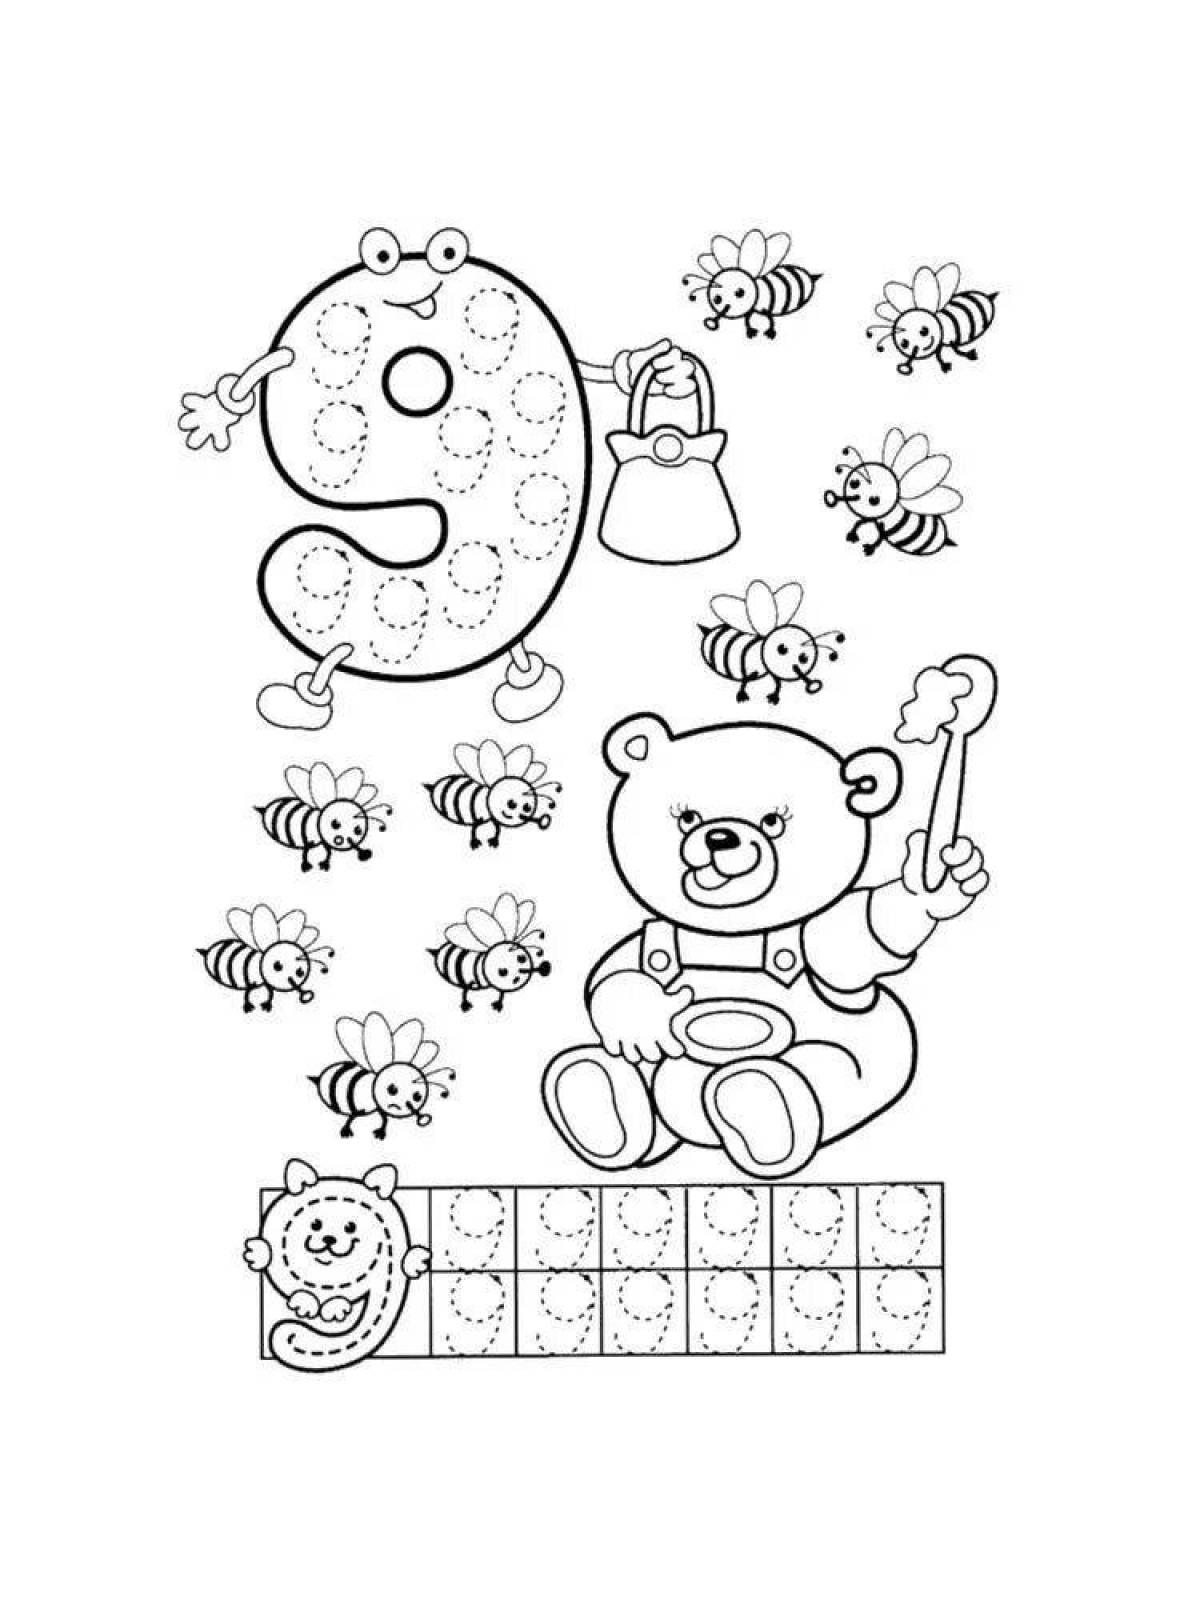 Colorful numbers and letters coloring book